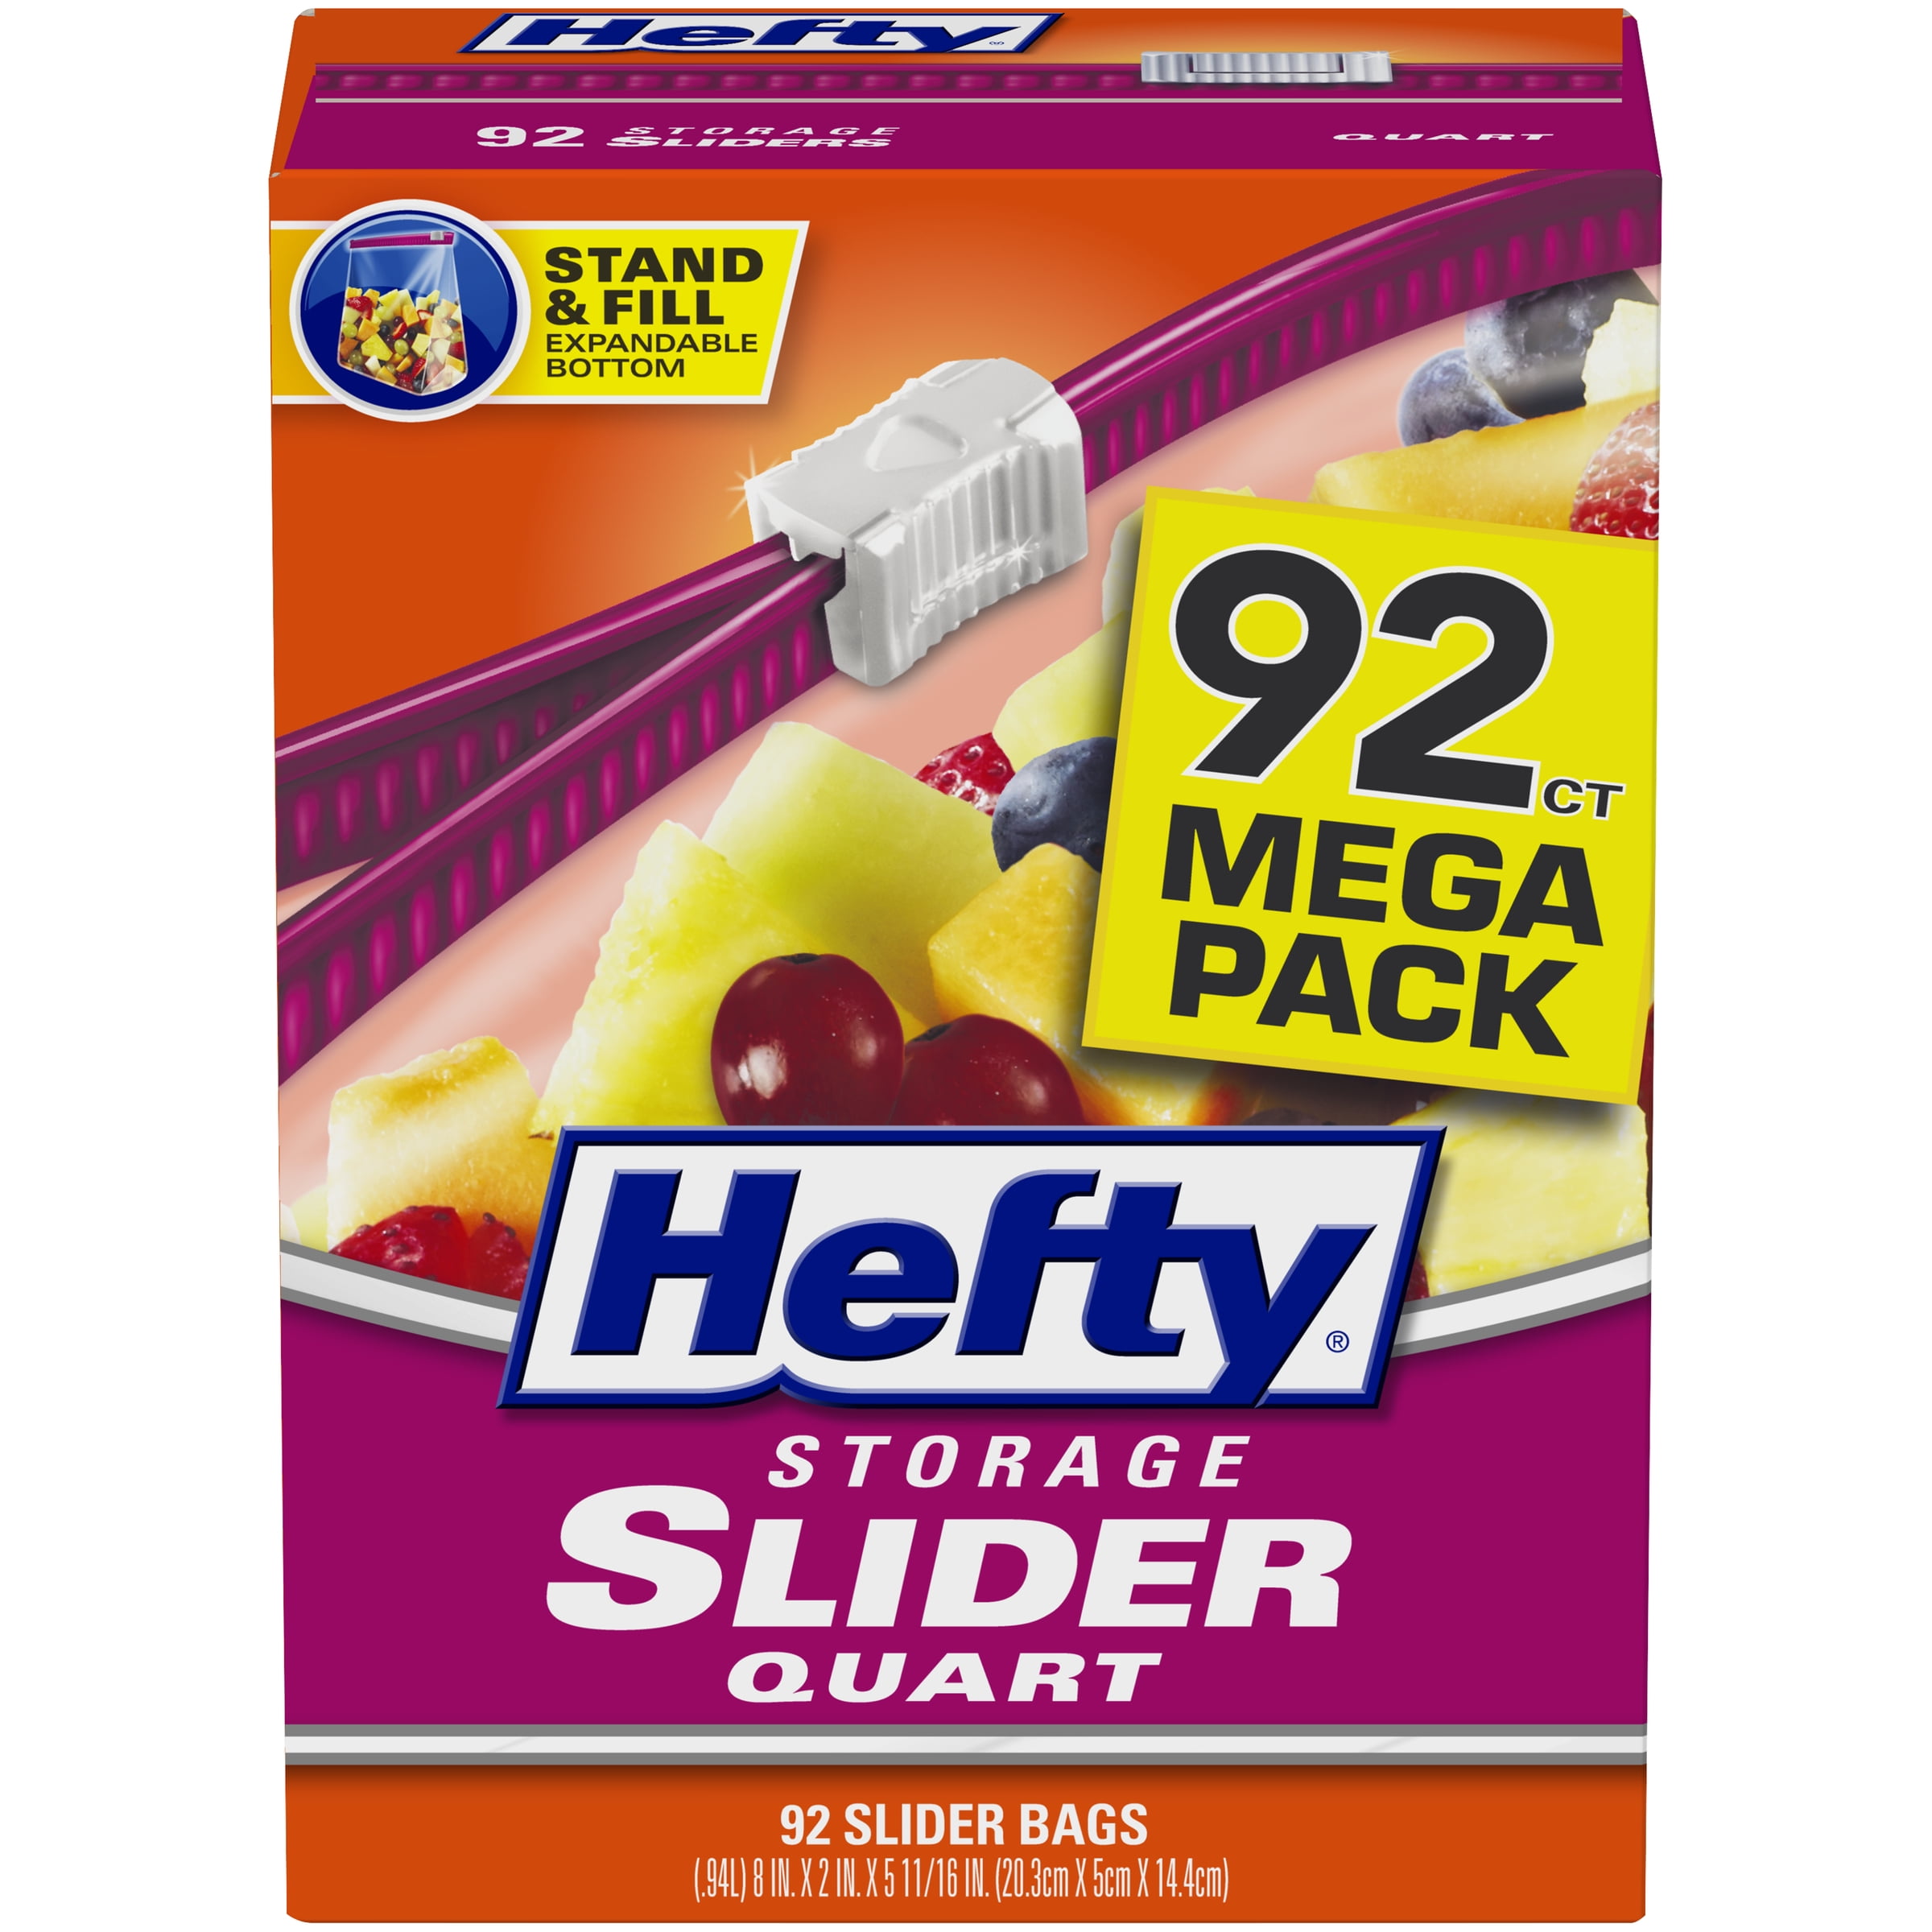 Hefty Slider Bags featured by Brand Power USA 